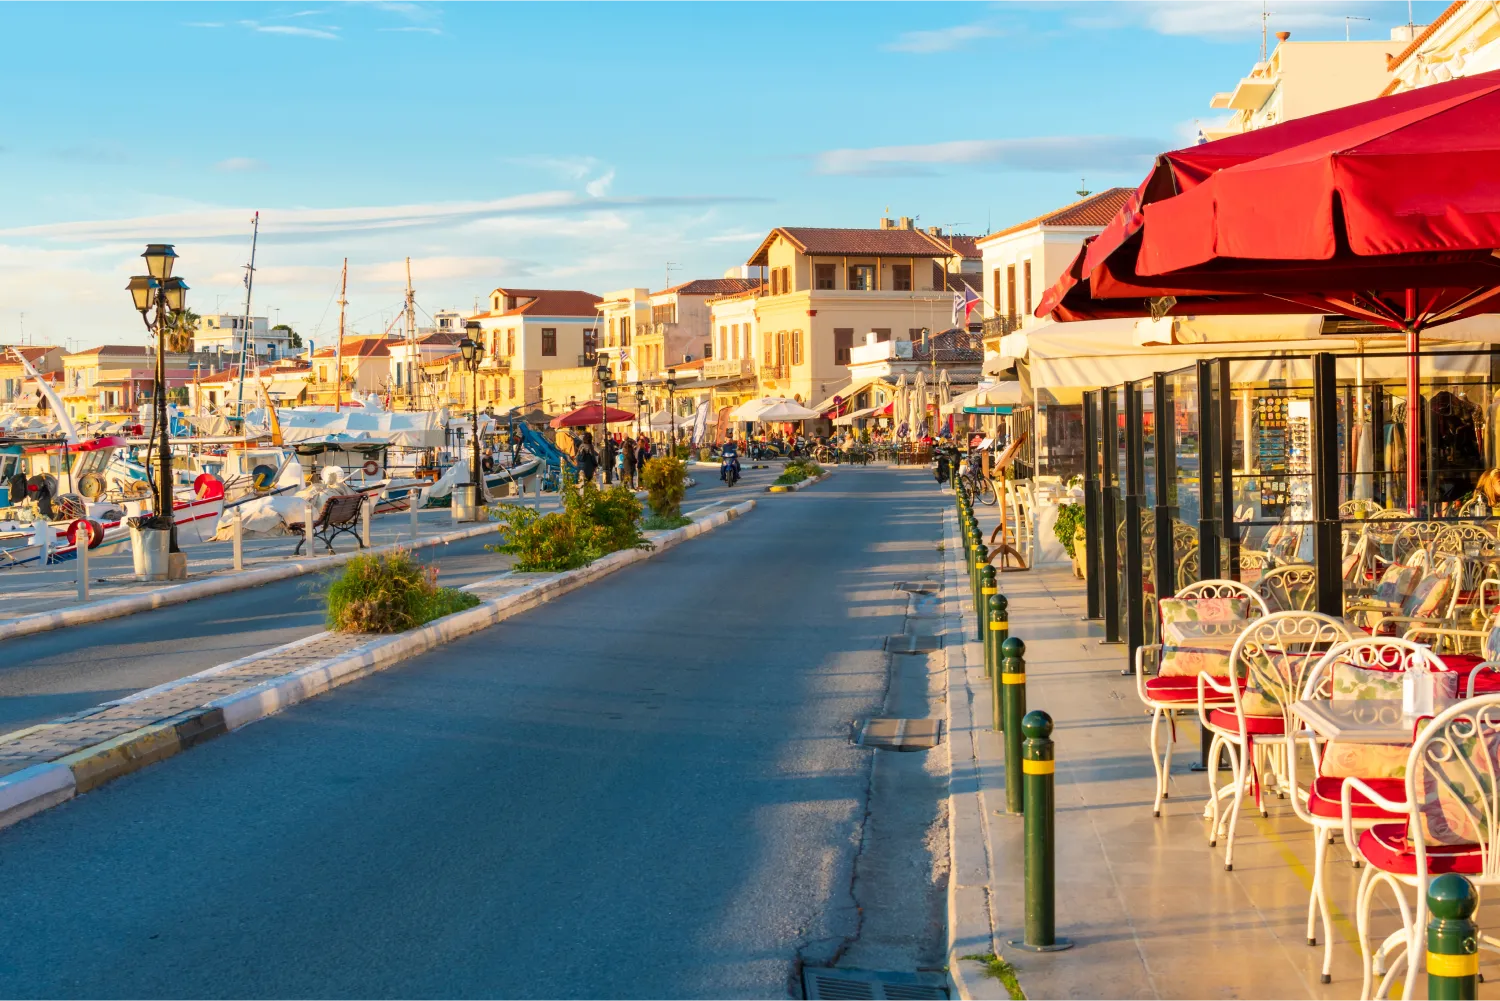 The Main Street Running Through The Picturesque Village Of Aegina With Shops And Cafes On One Side